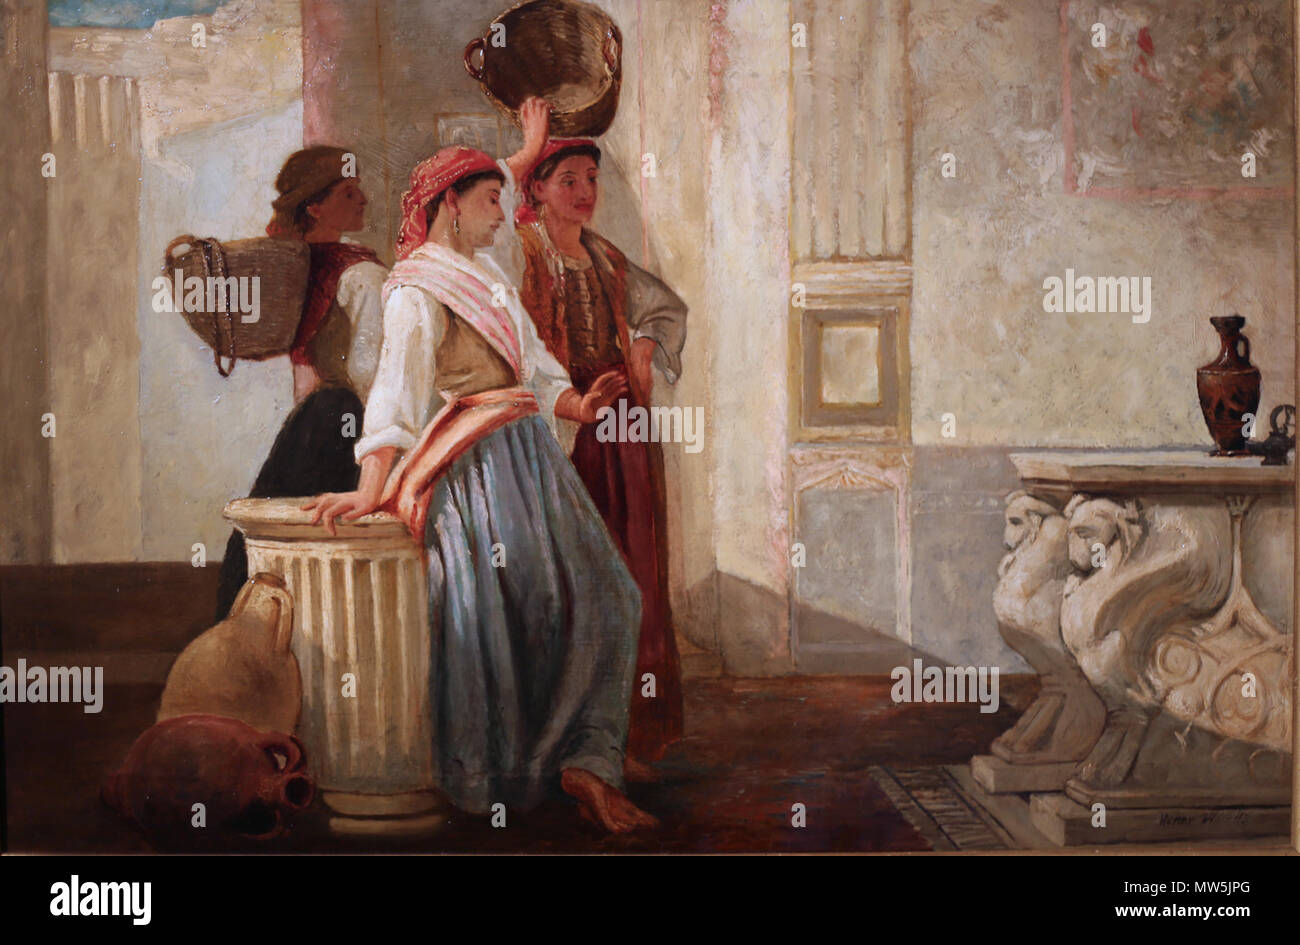 . English: Painting by Henry Woods (1846-1921) of three women contemplating classical art. It evokes the atmosphere of an ancient Roman city. Woods based this painting on women that he saw during his many years of living in Italy, and on artifacts excavated from Pompeii. (Private collection) . circa 1880. Henry Woods (1846-1921) 653 Woods Women Contemplating Classical Art Stock Photo